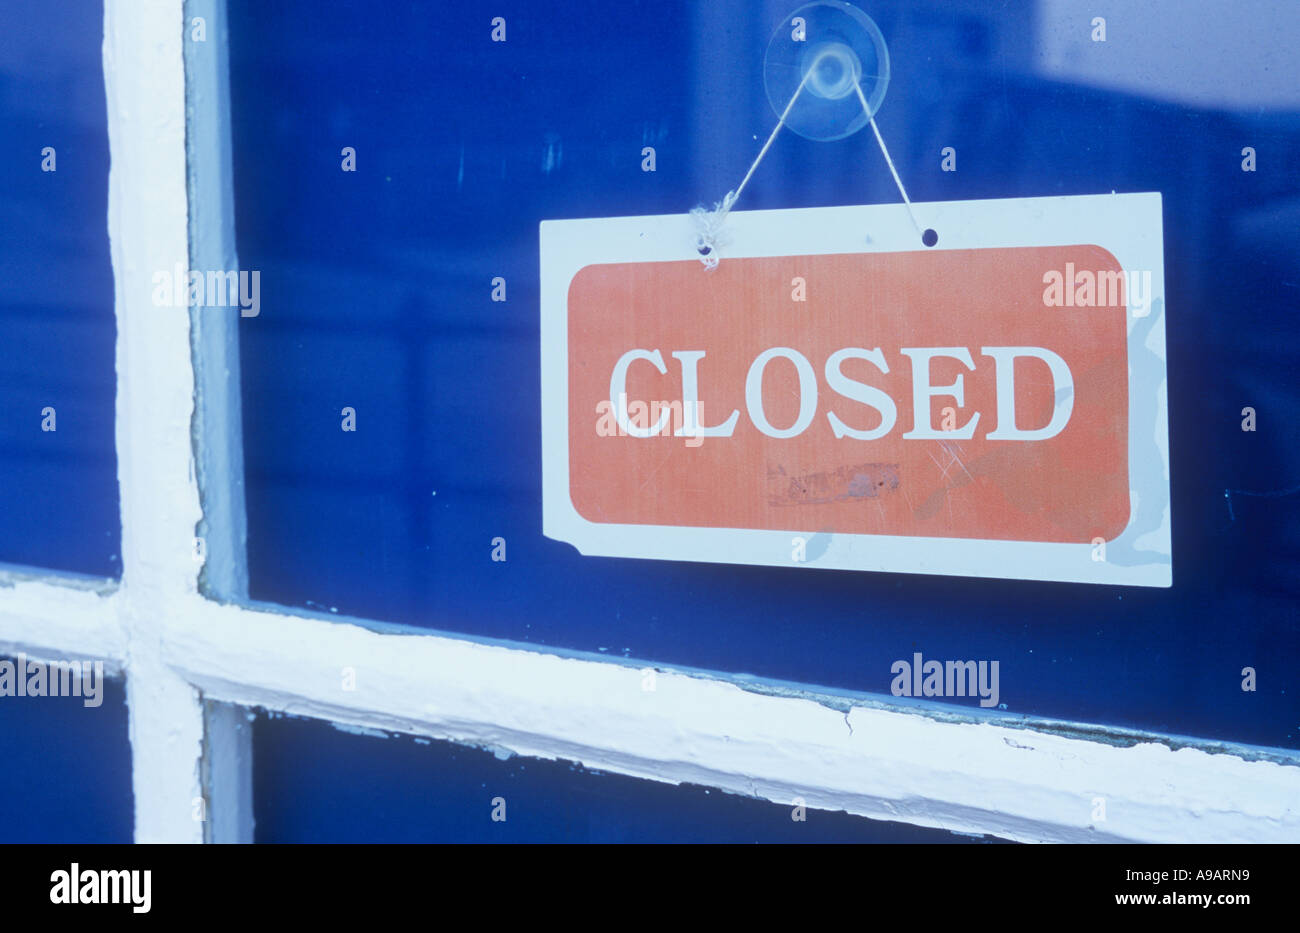 Close up of a red and white sign in a shop or kiosk or cafe window with blue blinds or curtains stating Closed Stock Photo